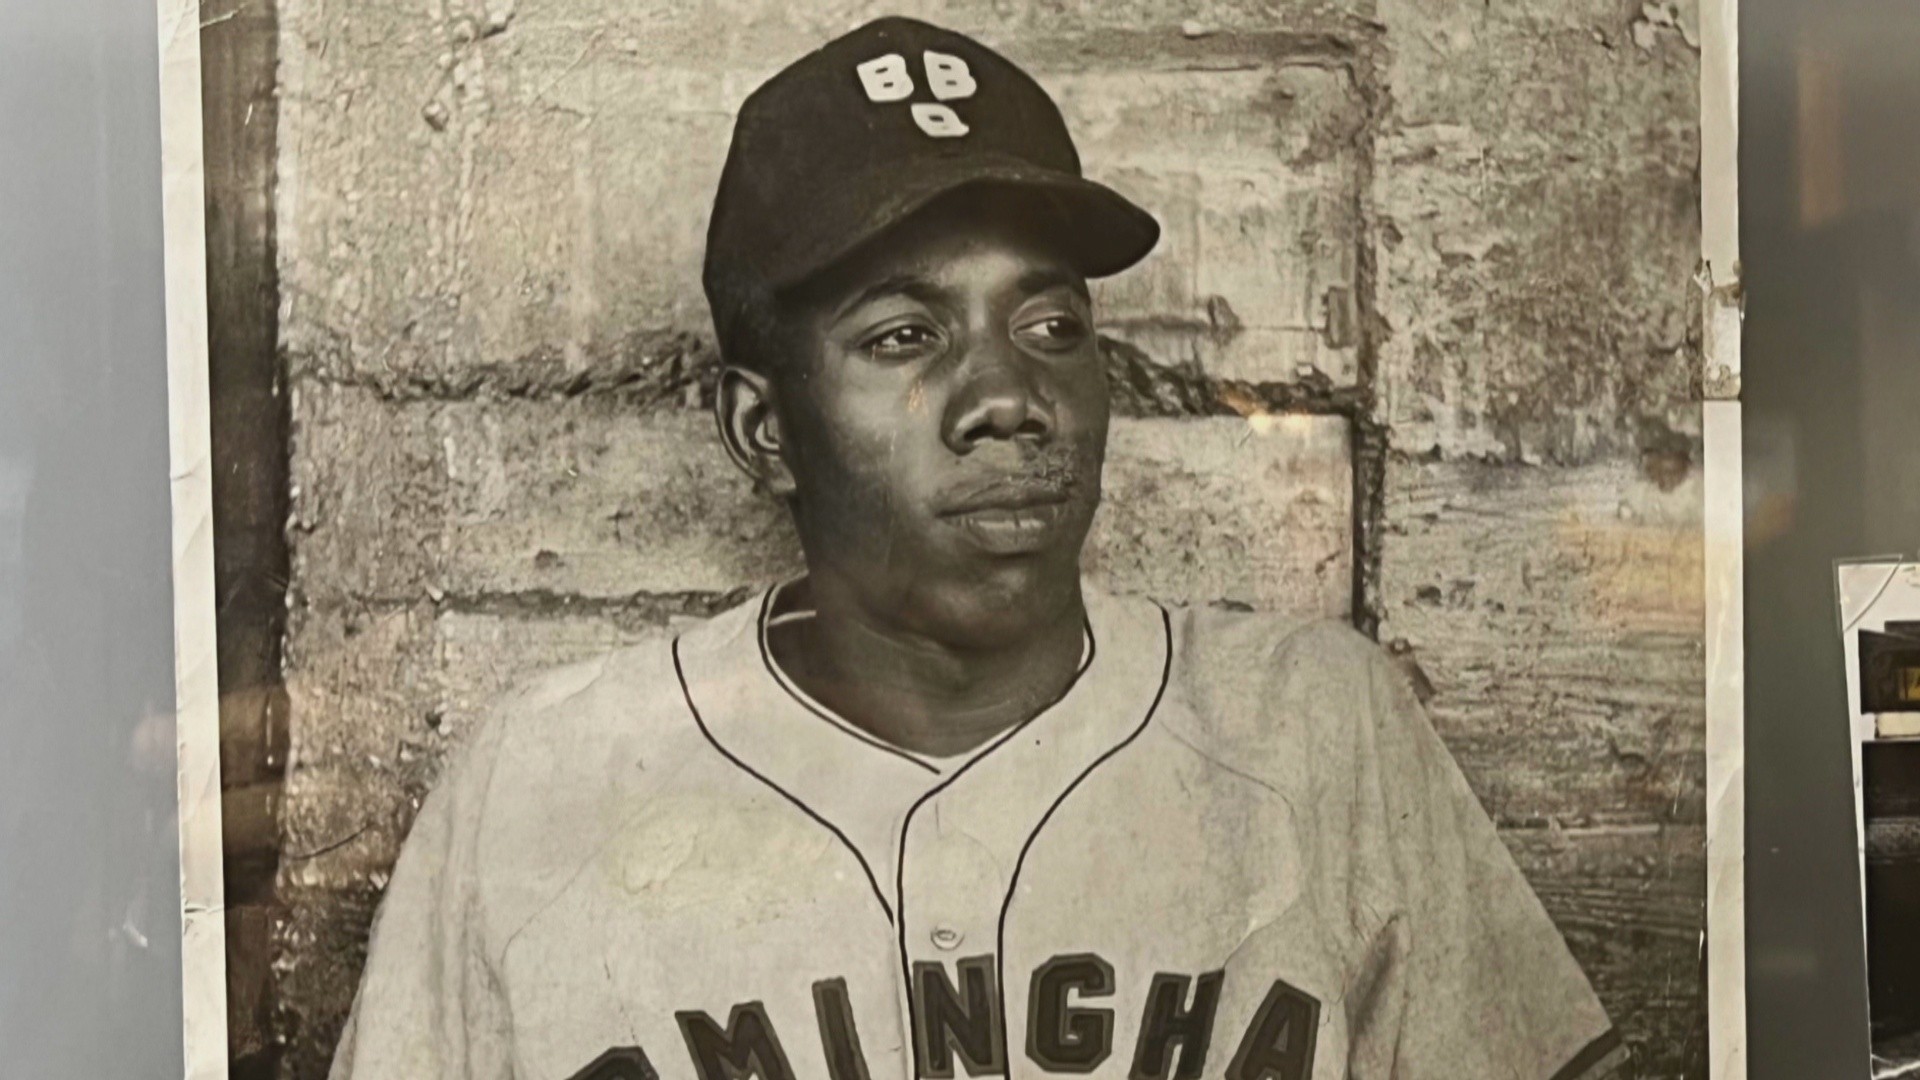 MLB to honor Negro Leagues with historic game at Rickwood Field